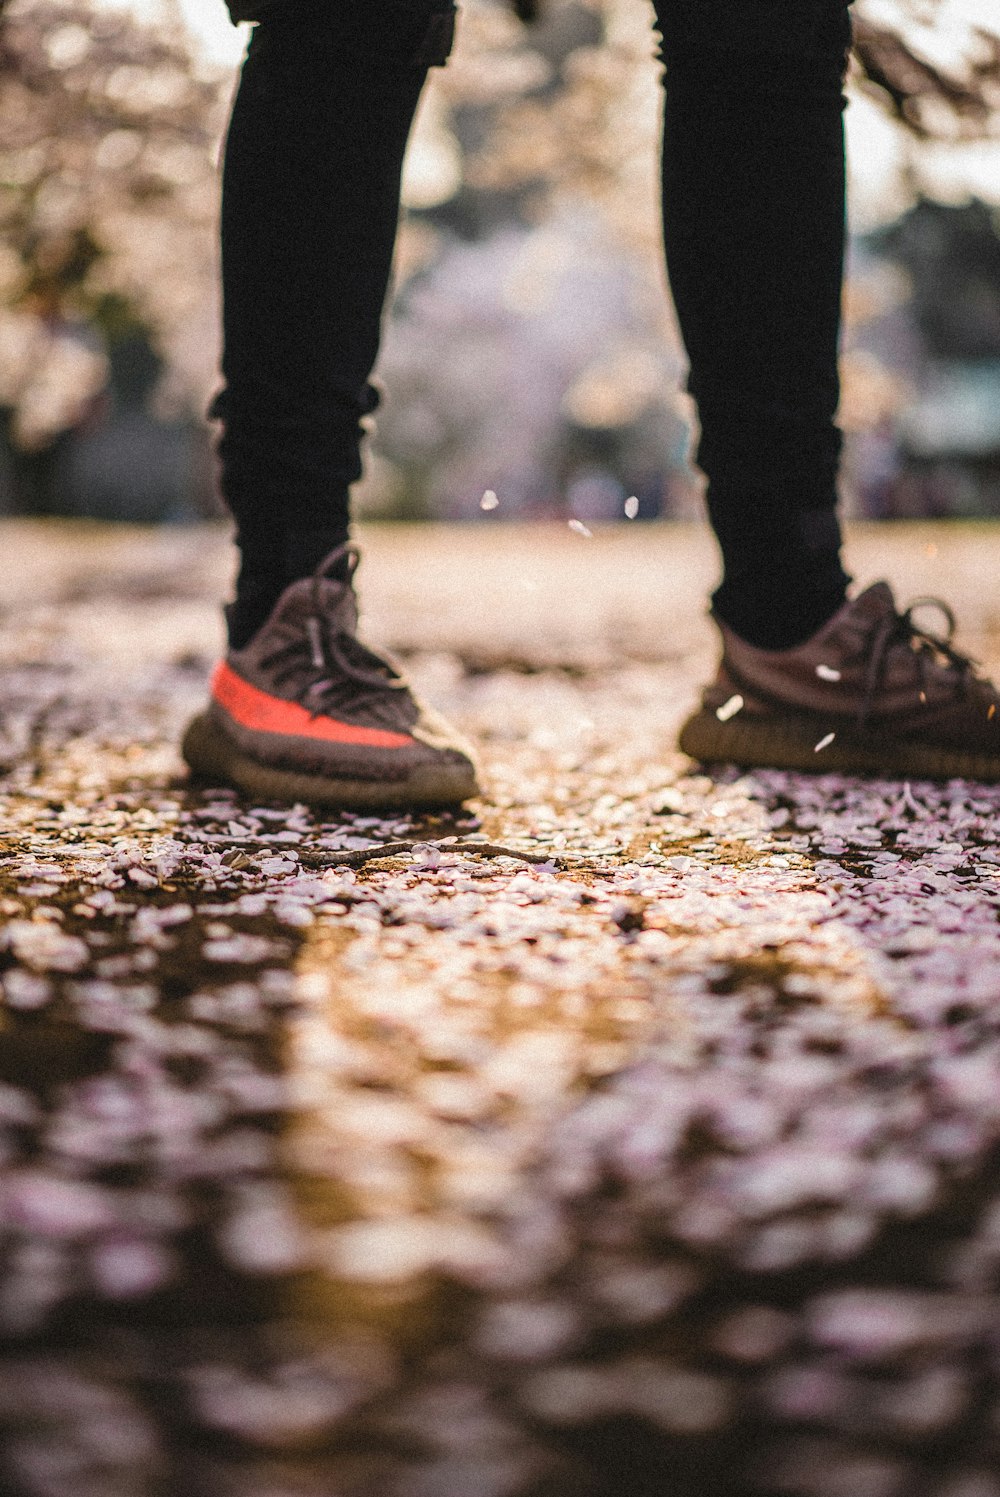 person wearing black denim jeans and adidas Yeezy Boost 350 V2 standing  photo – Free Apparel Image on Unsplash